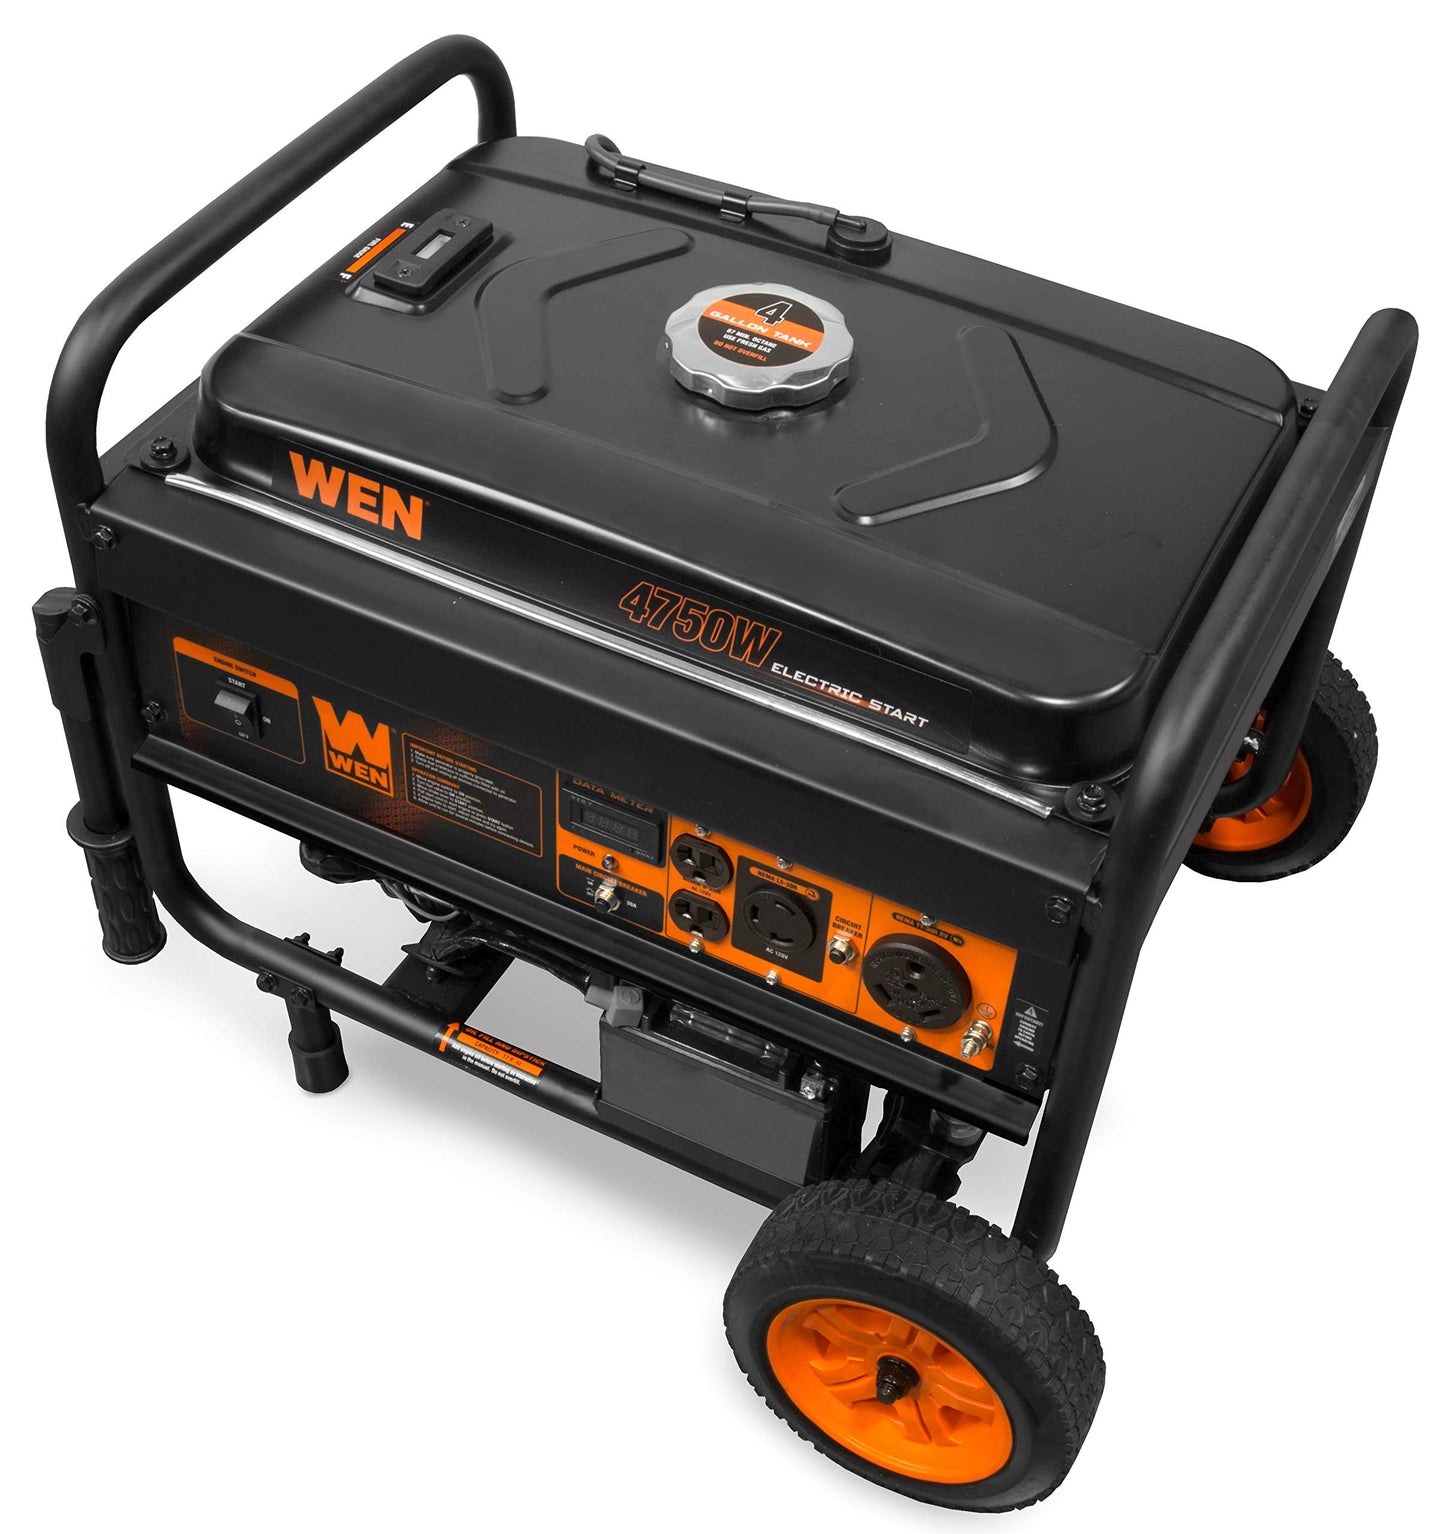 WEN 56475 4750-Watt Portable Generator with Electric Start and Wheel Kit, Yellow and Black 4750W + Single Fuel + Electric Start